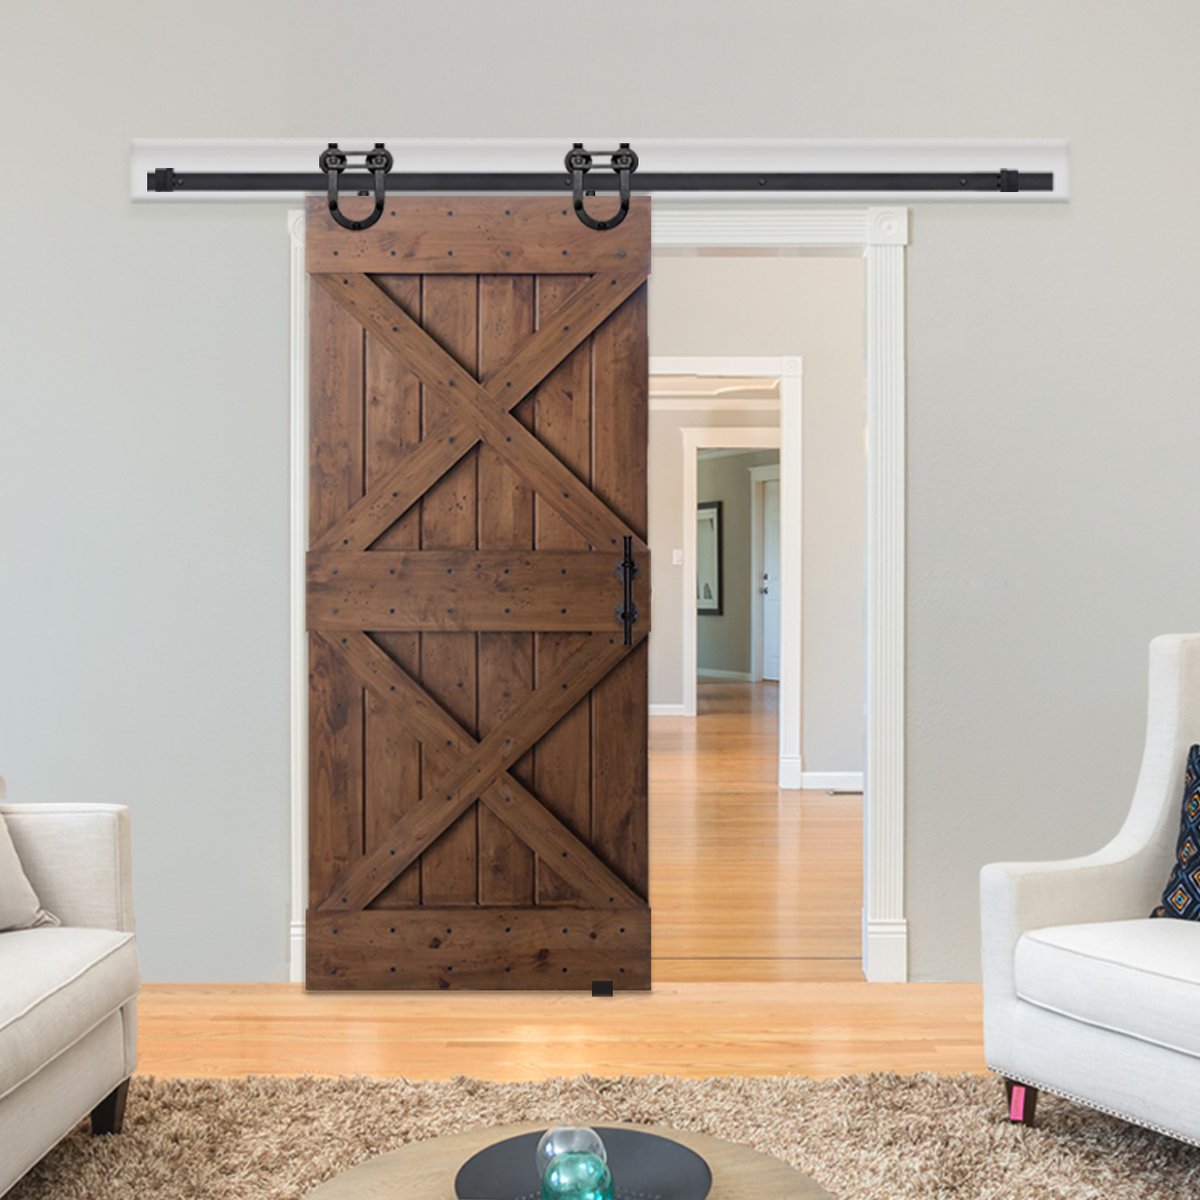 Modern Country Charm 😍 Show off your home's quaint country cottage charm with a Double X barn door! 
.
.
#countryliving #rusticdoor #barndoors #wooddoor #wood #woodworking #countrycottage #countrydesign #charm #interiordesign #design #moderncountry #rustichome #rusticfarmhouse